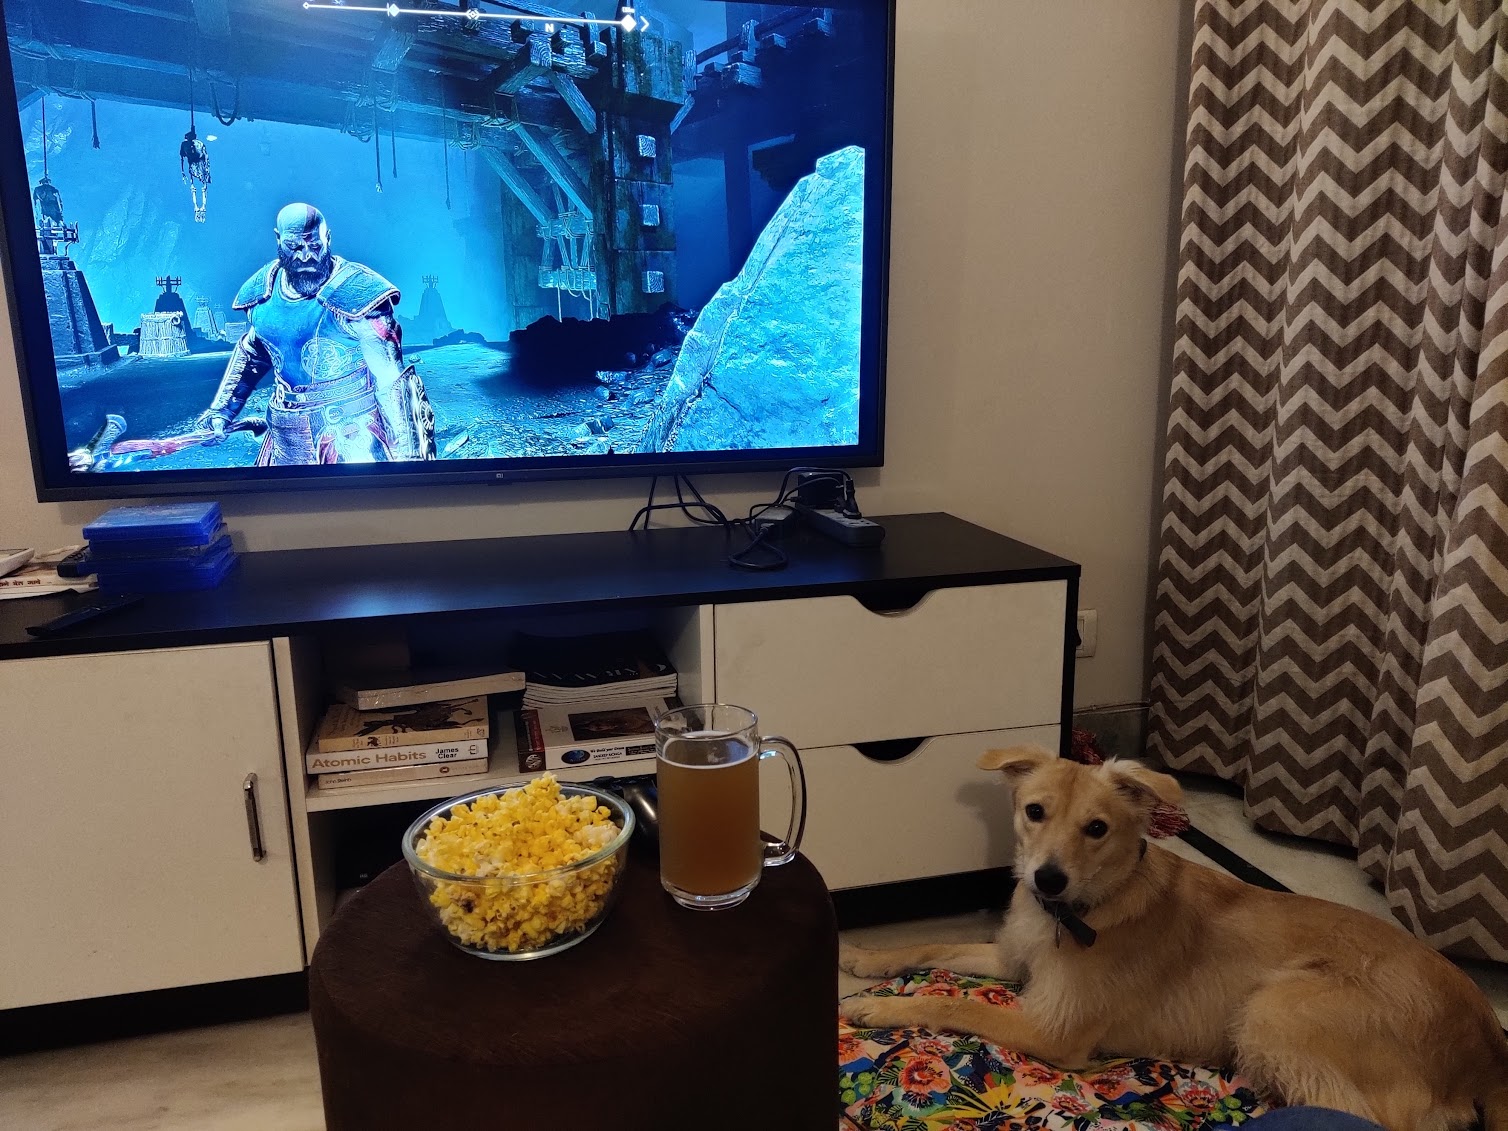 Dog, Beer and Popcorn